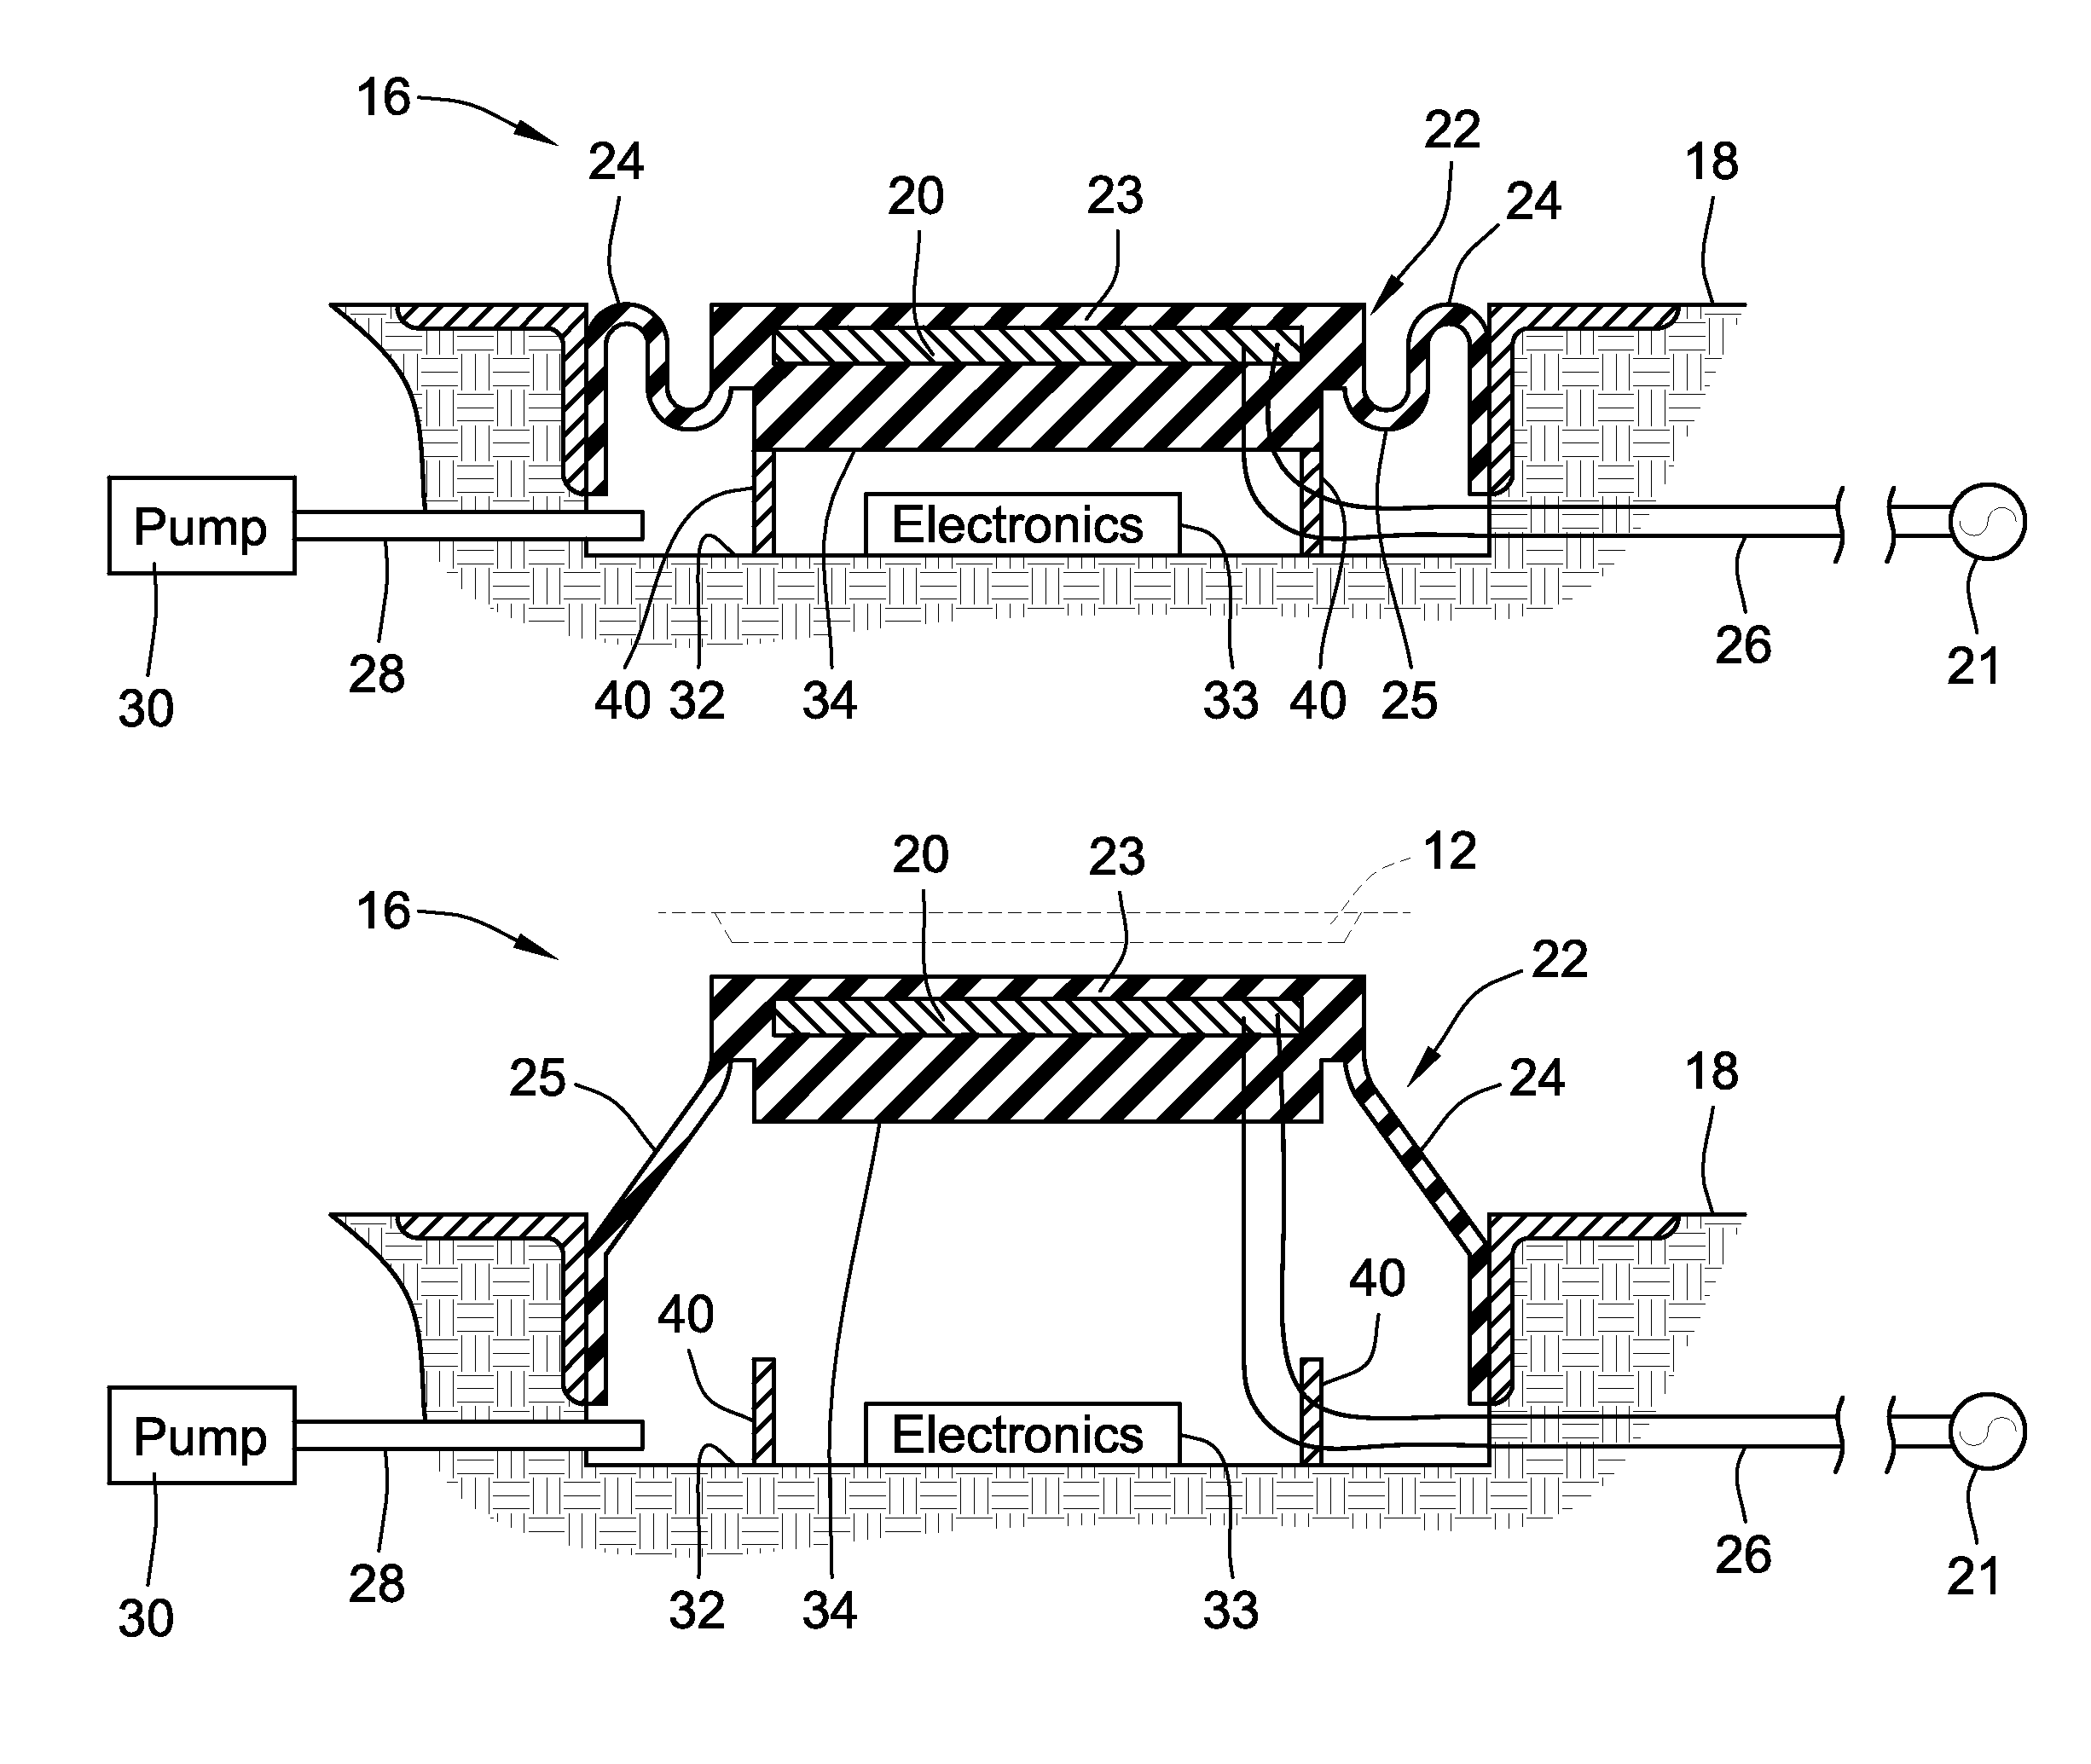 Extendable and deformable carrier for a primary coil of a charging system